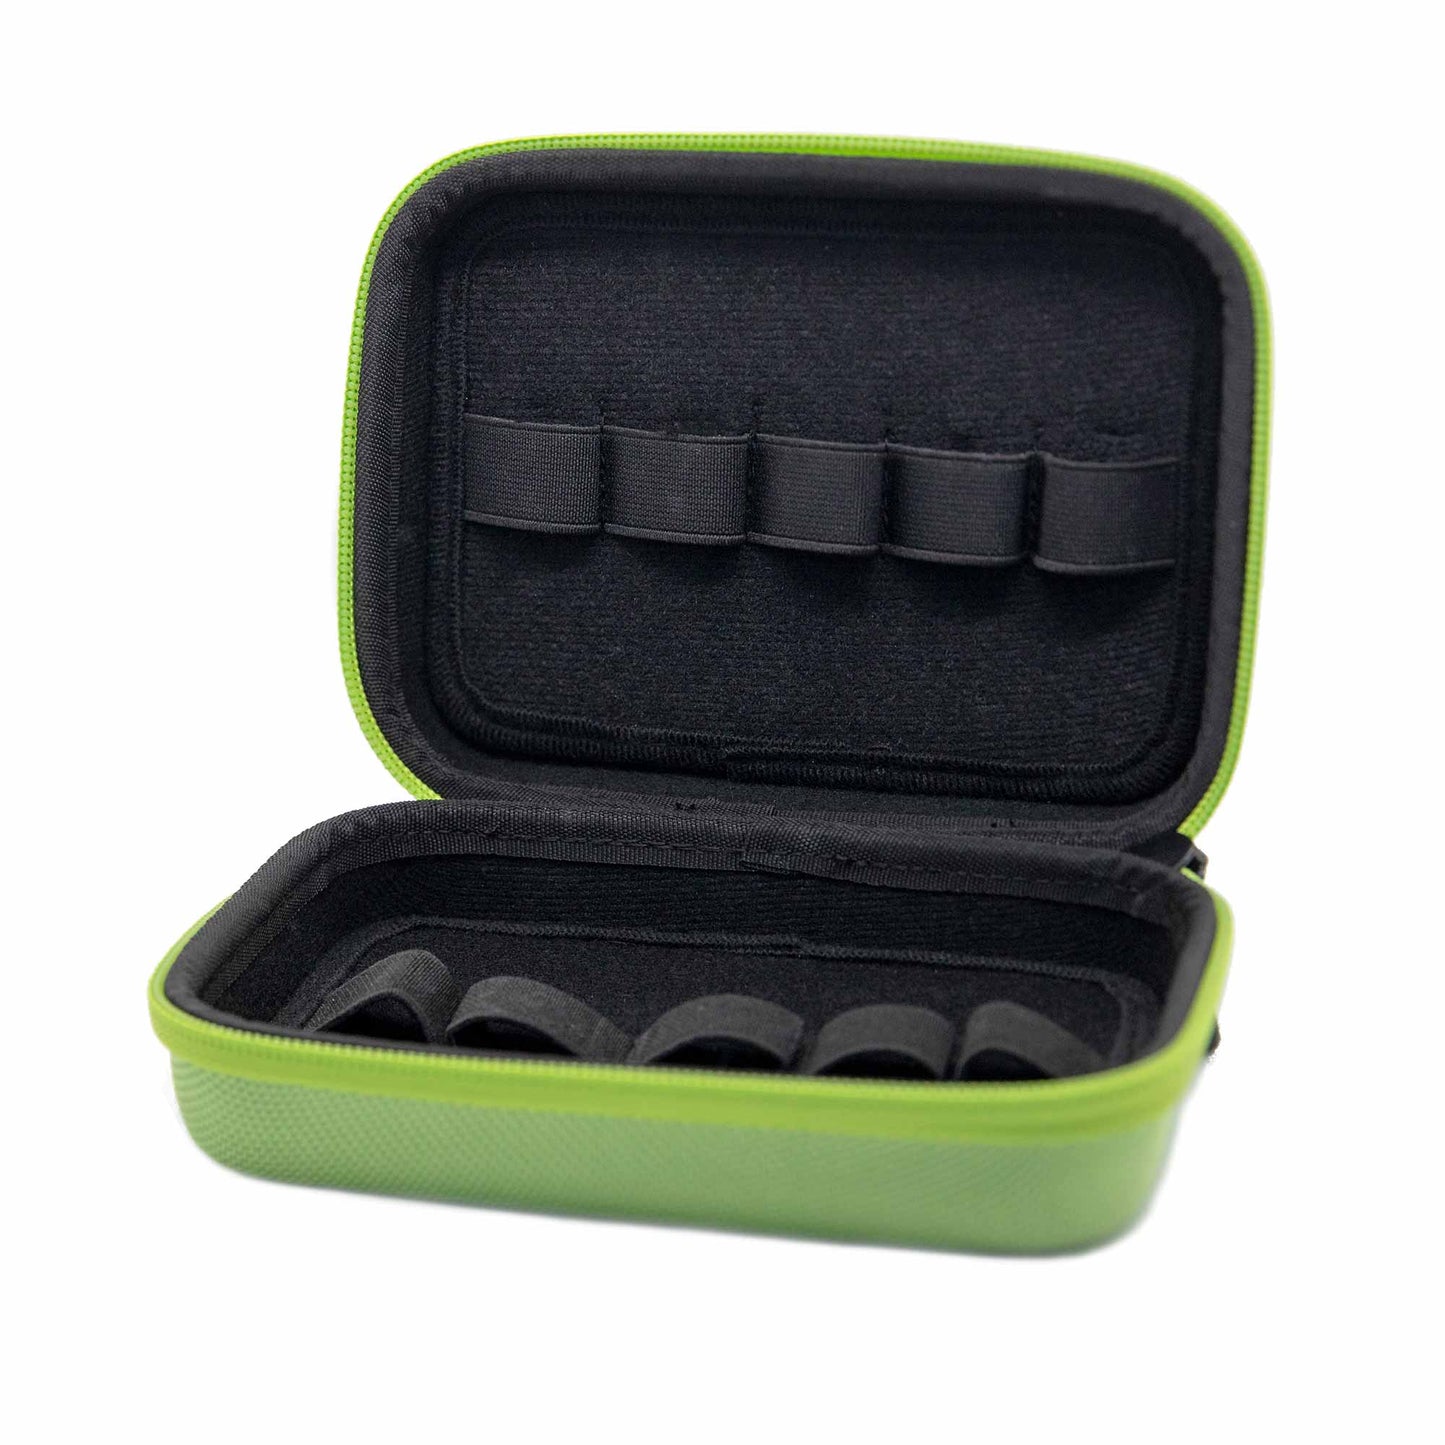 Hard-Top Carrying Case - Small Green